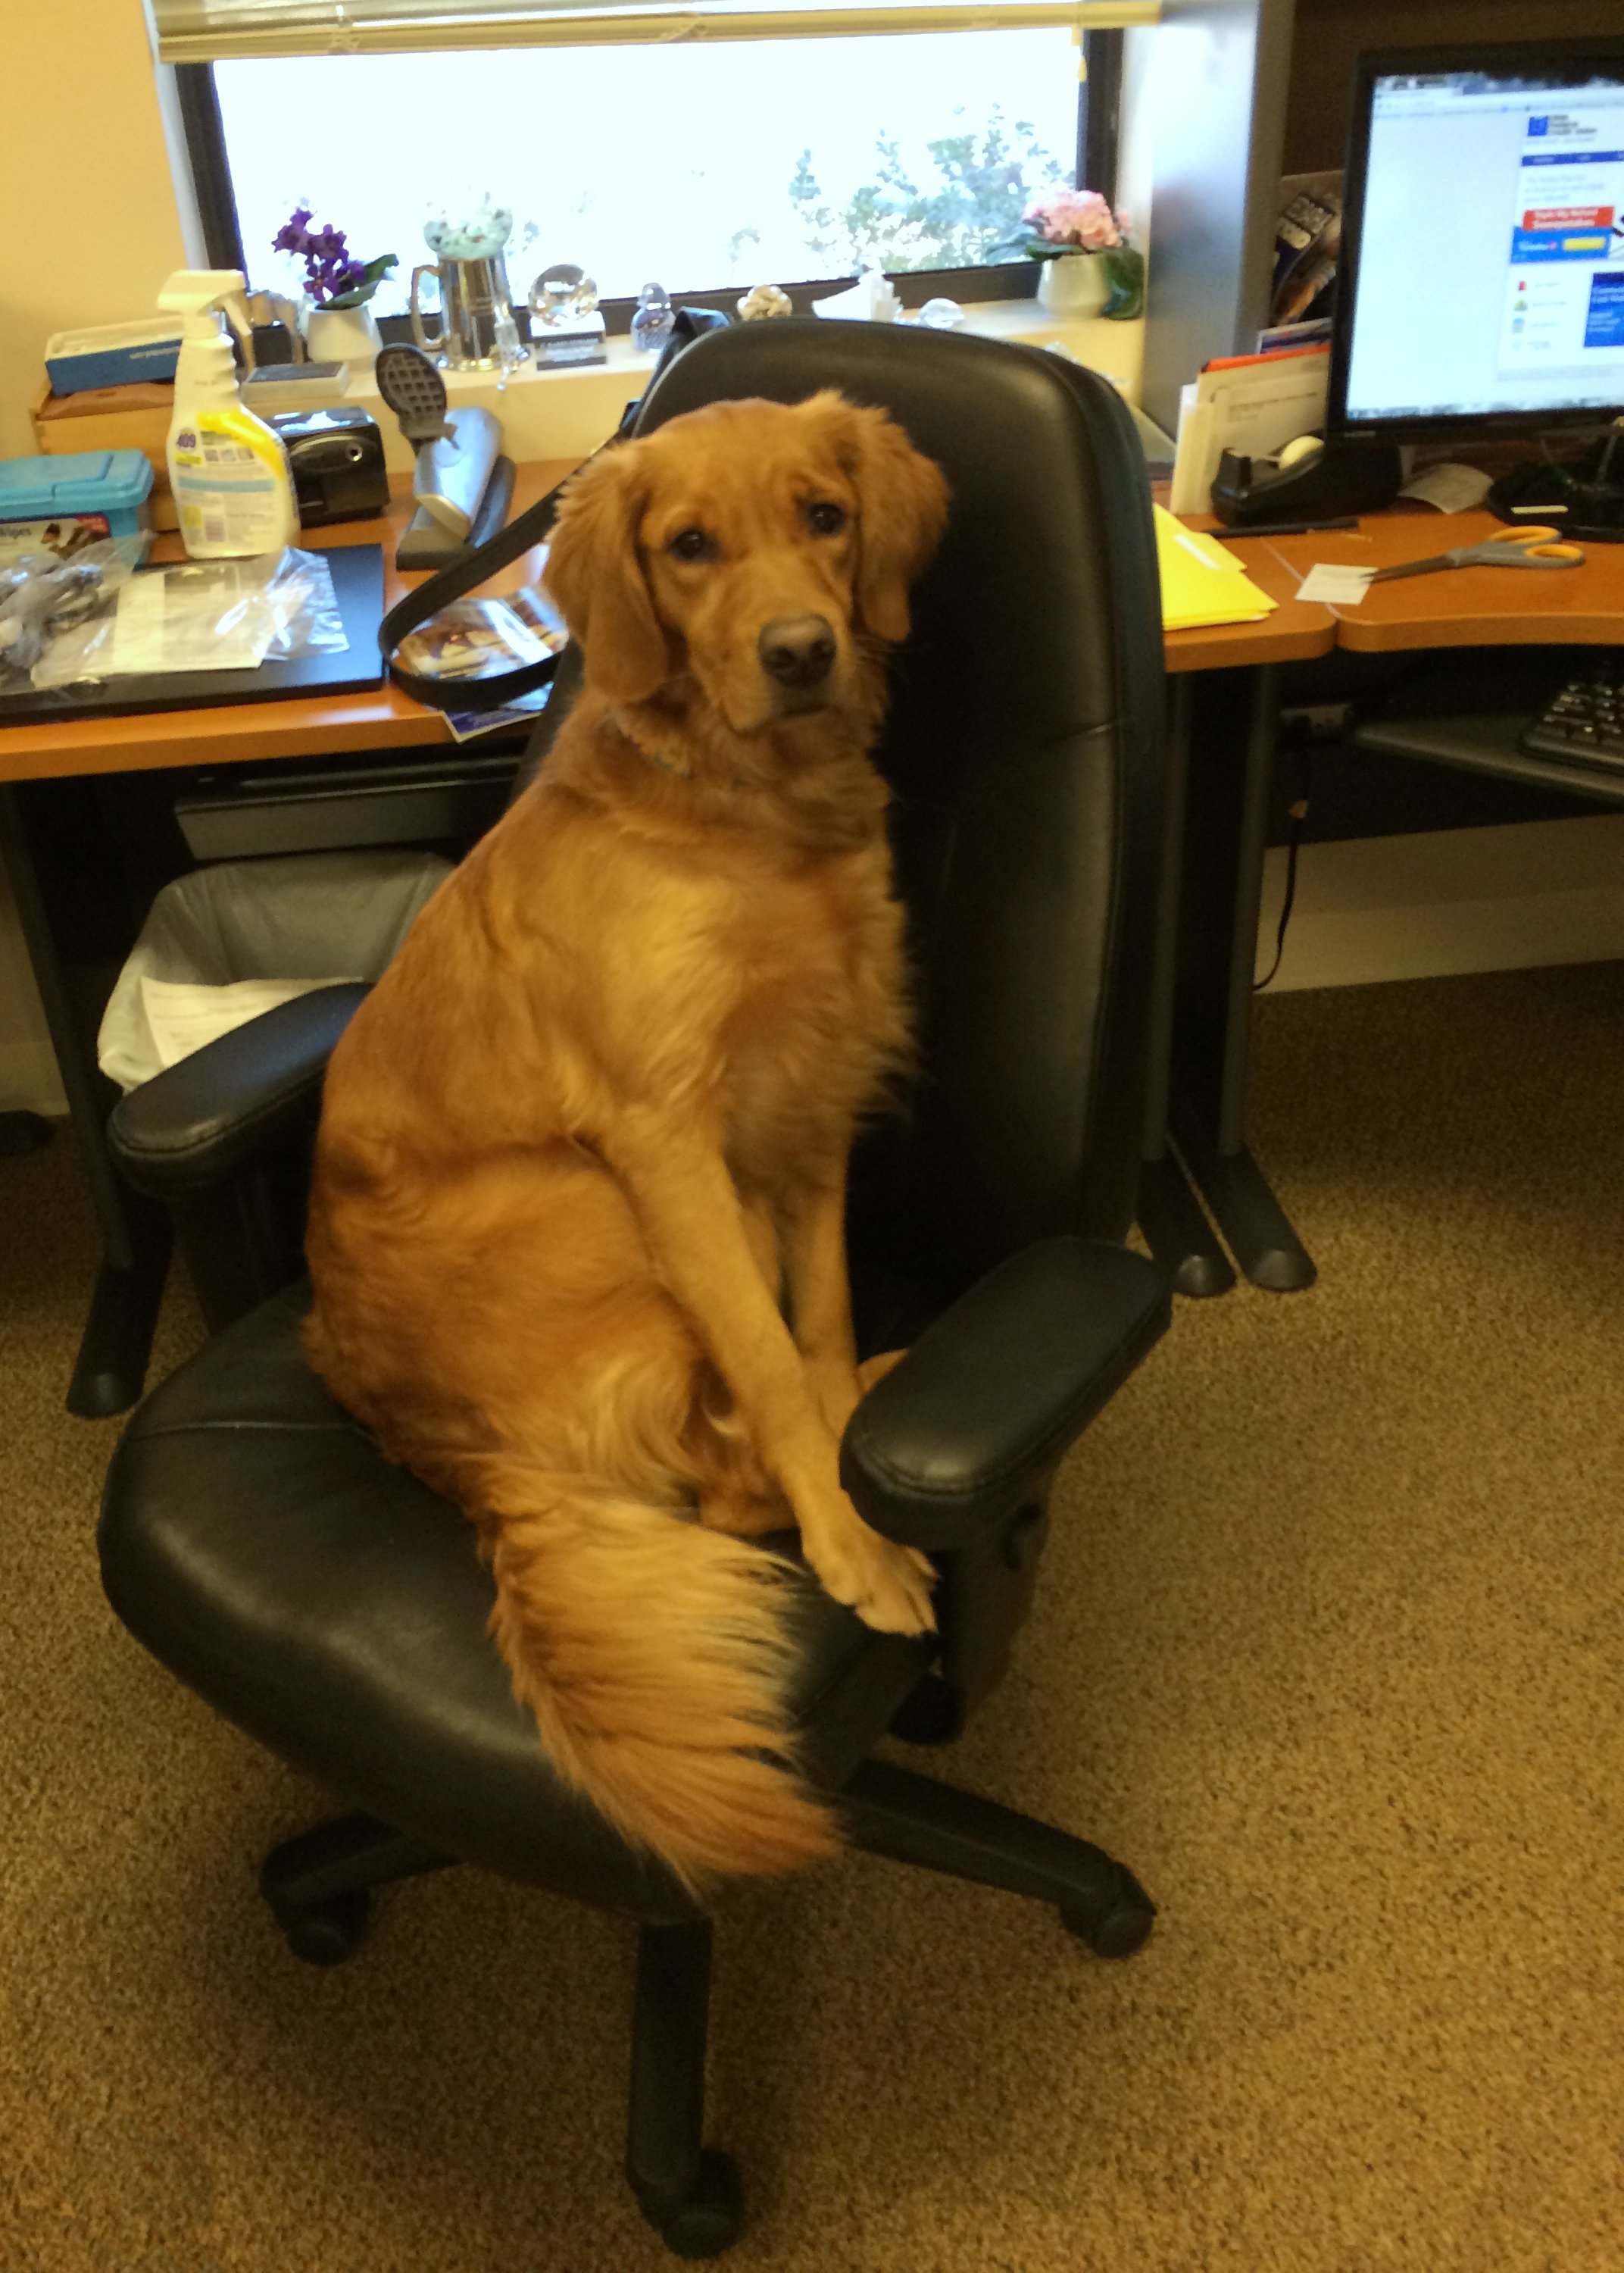 Dog in office chair